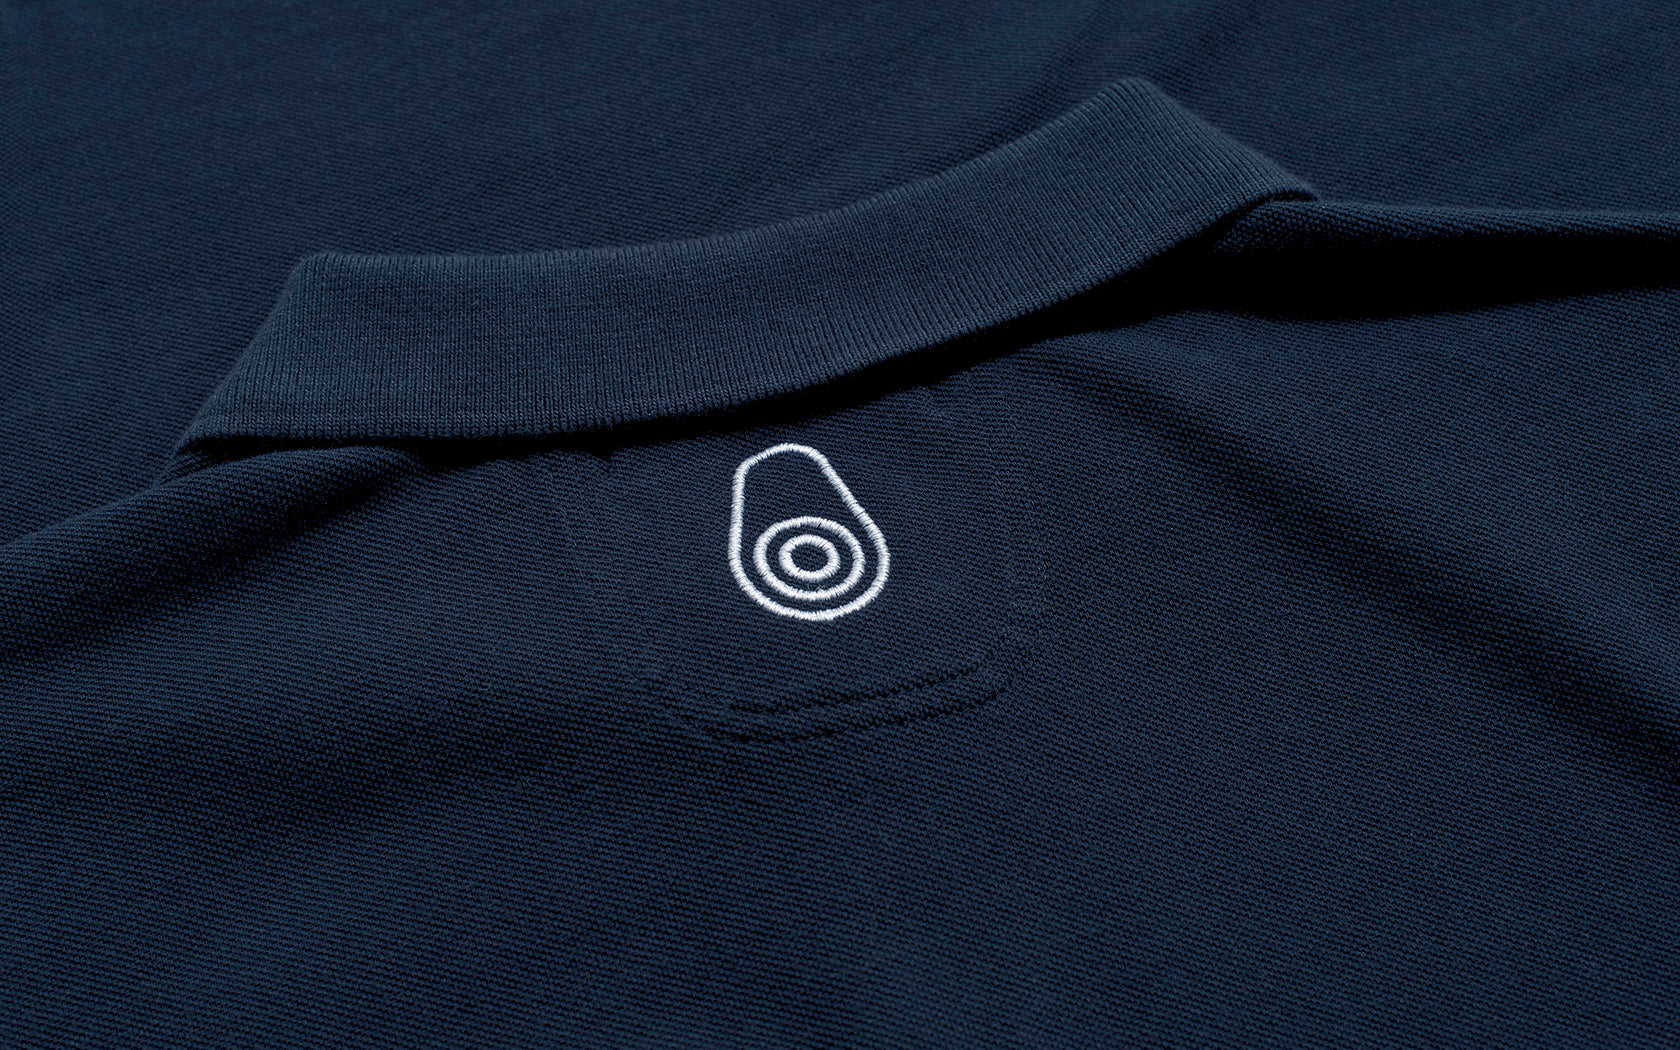 Load image into Gallery viewer, BOWMAN LOGO POLO